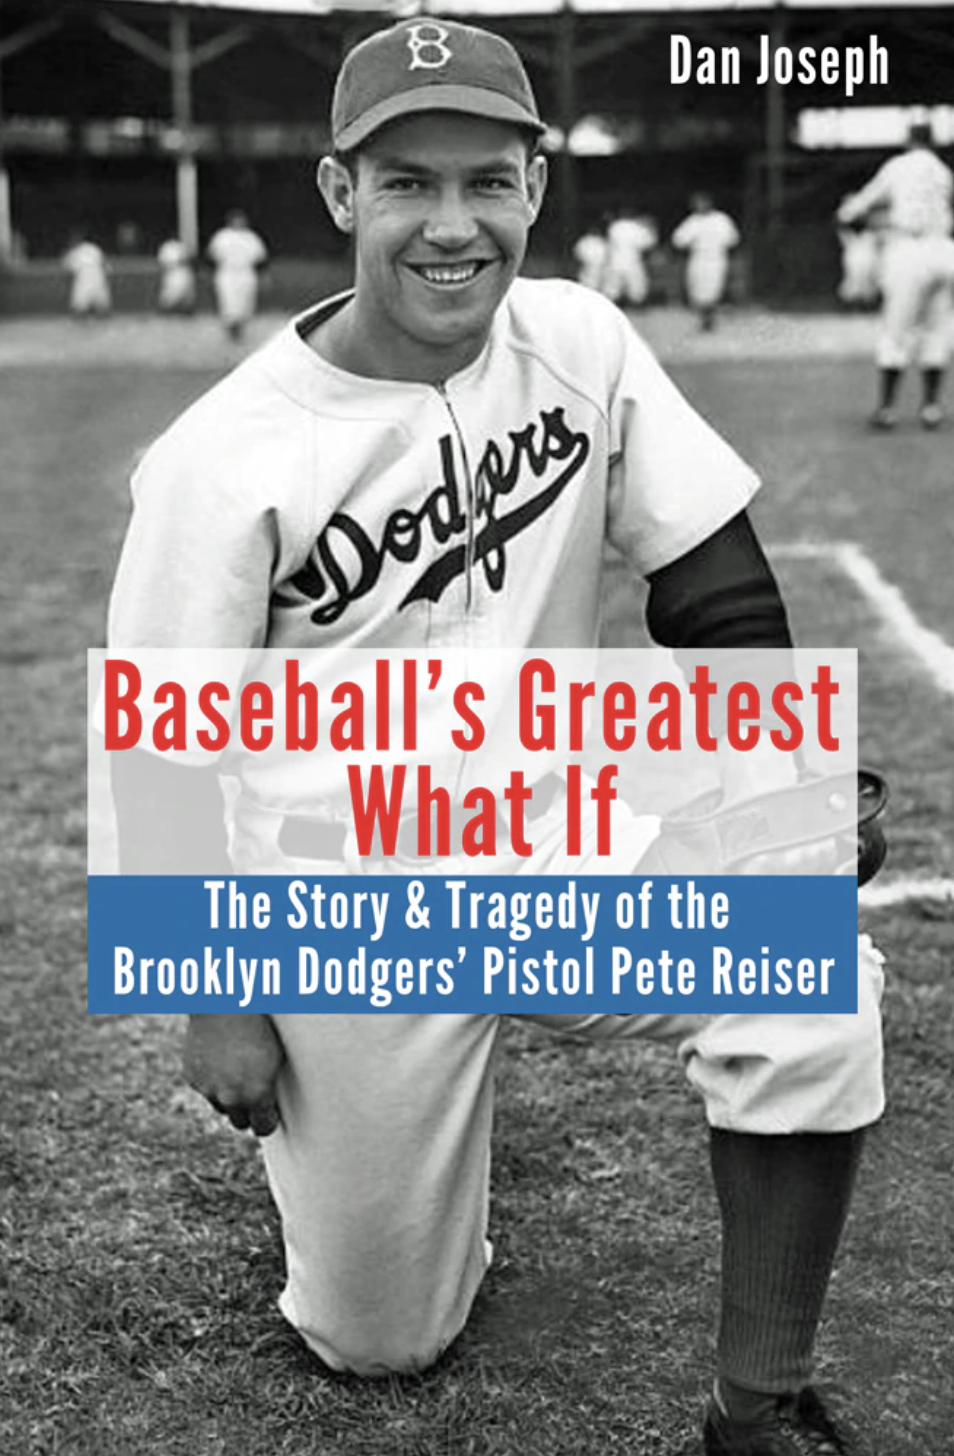 Baseball’s Greatest What If: The Story and Tragedy of Pistol Pete Reiser, by Dan Joseph